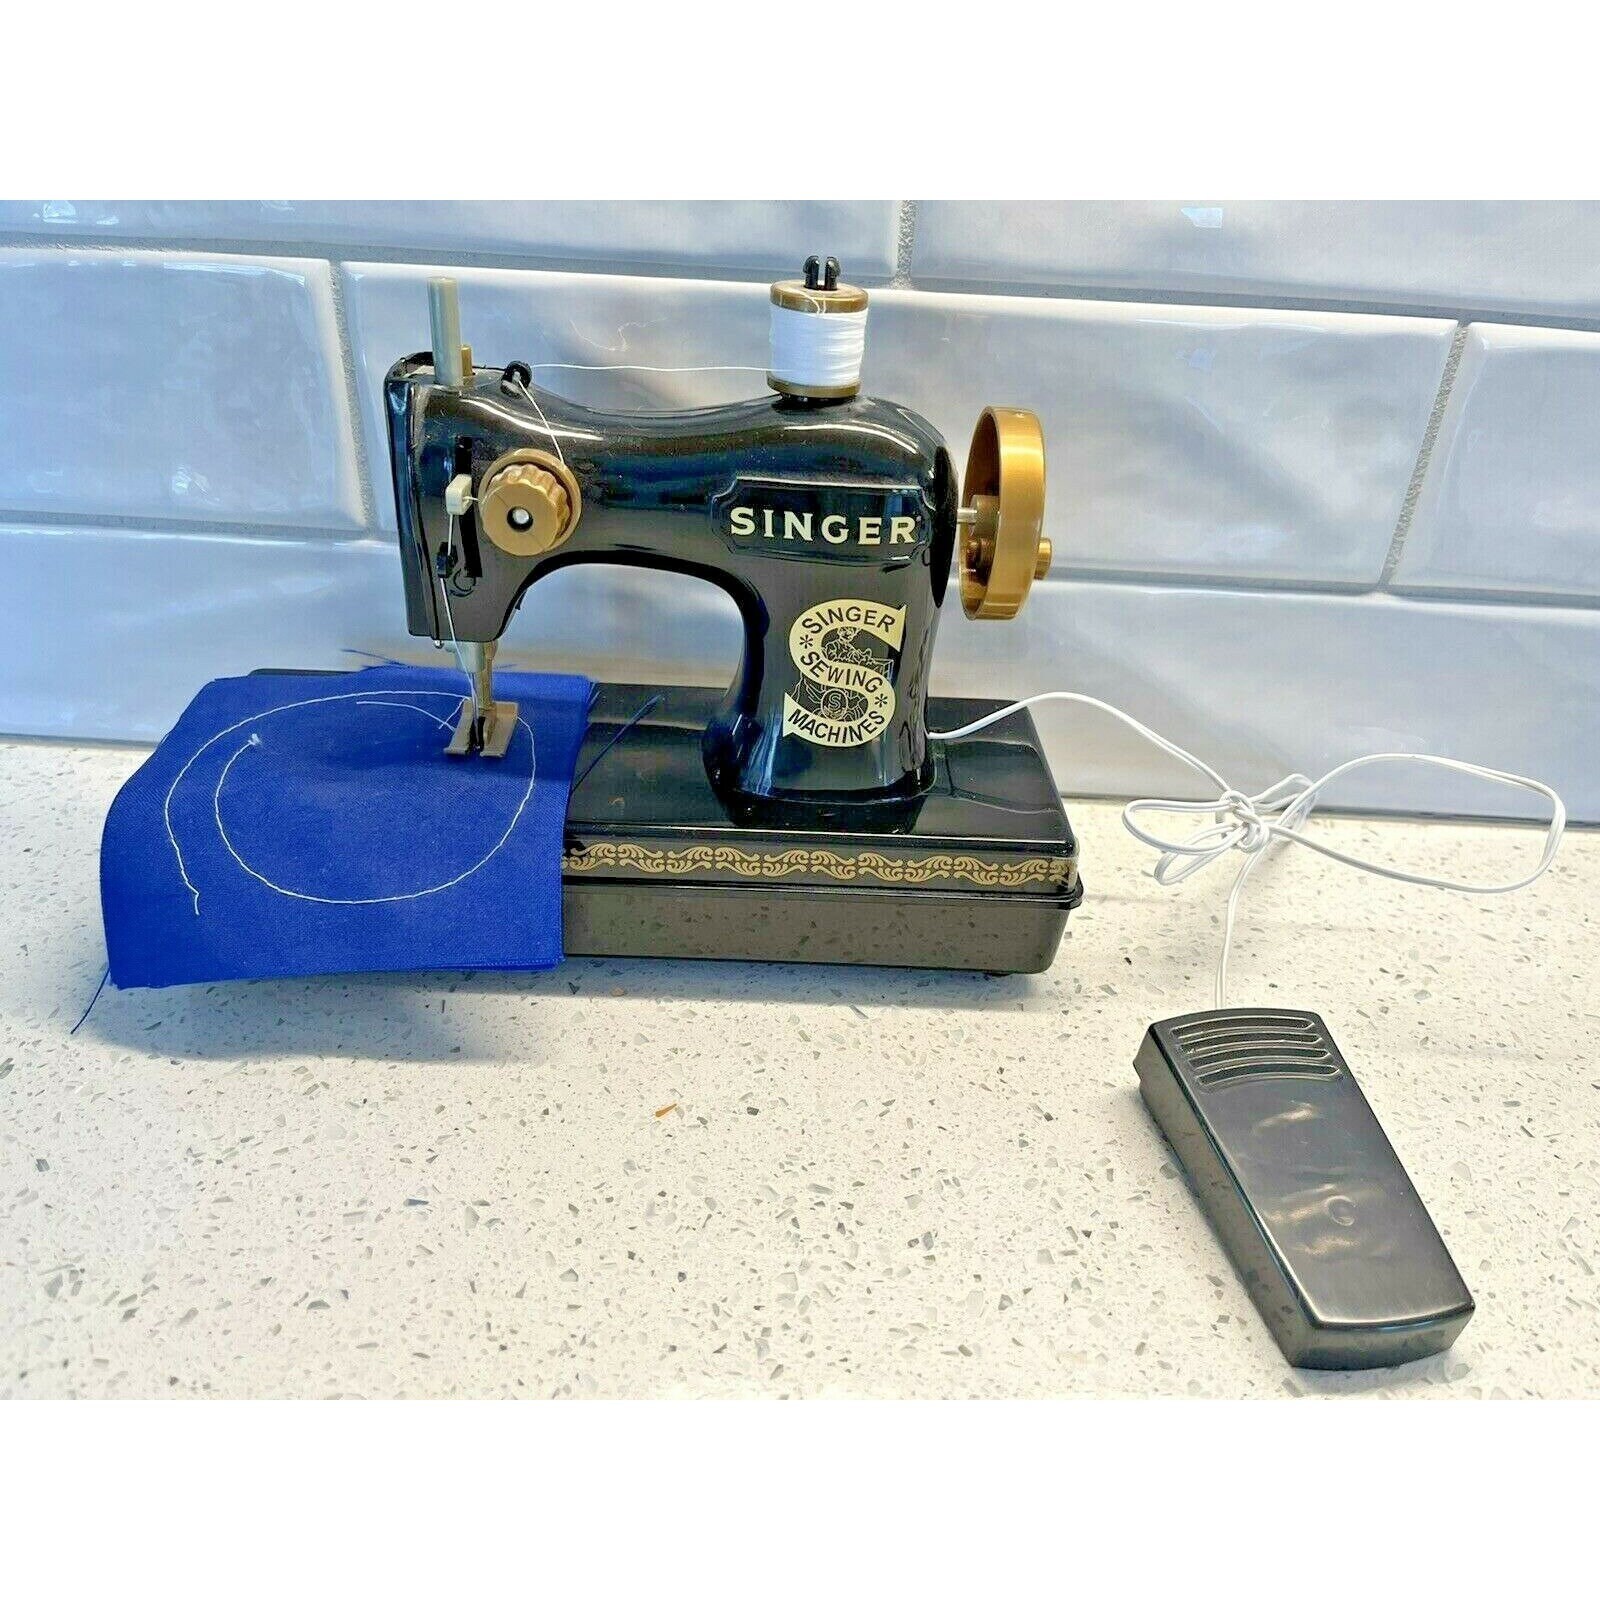 Home Play Singer Original Chainstitch Sewing Machine Toy Age 6 A2401 for sale online 